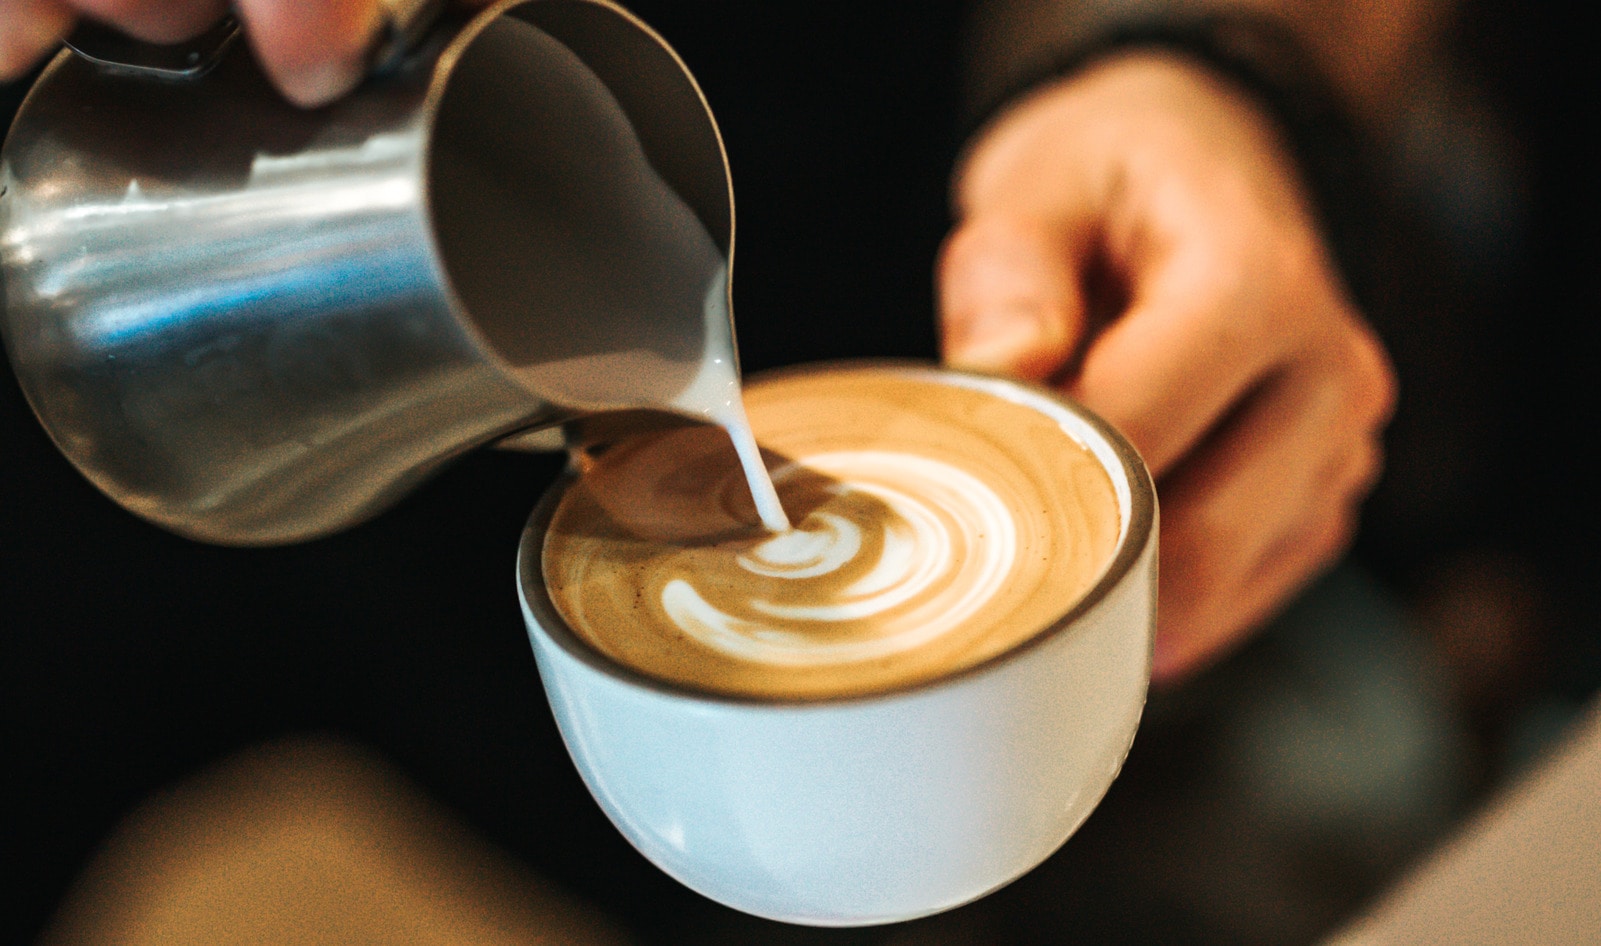 Another Win for Oat Milk? Meet the First Espresso Machine With a One-Touch Vegan Milk Setting.